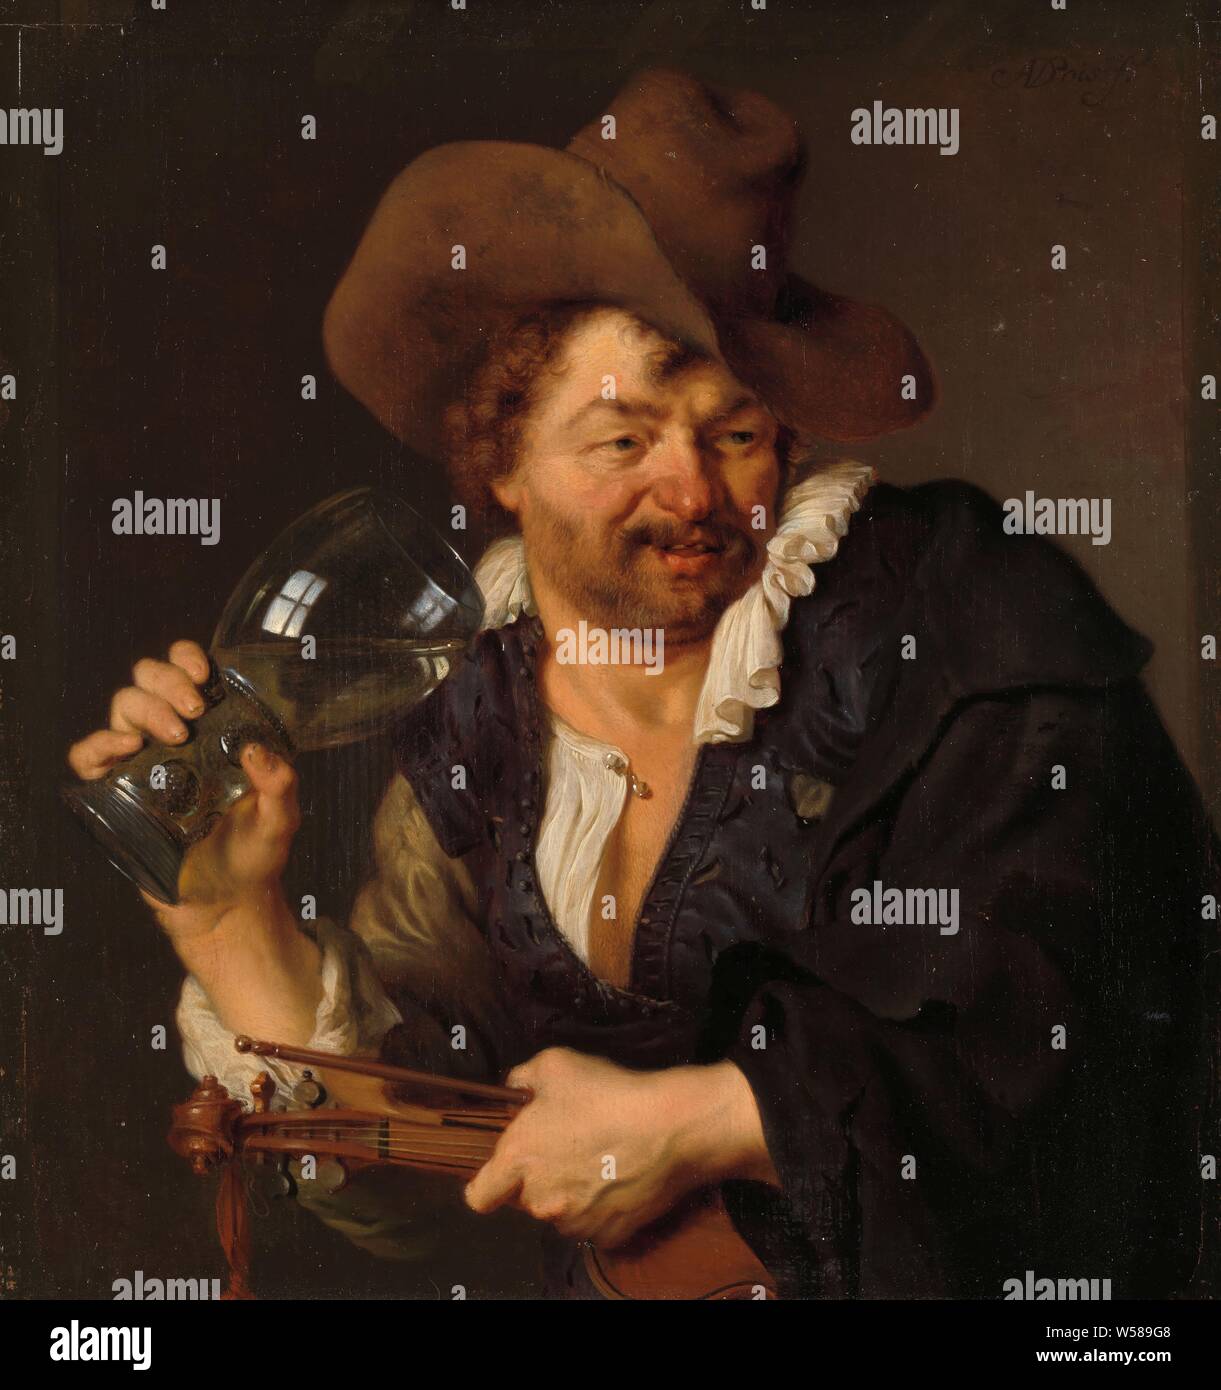 The Merry Fiddler, The cheerful playman. A man with a violin and bow brings a roemer with white wine to the mouth, glass, rummer, violin, fiddle, Ary de Vois, 1660 - 1680, panel, oil paint (paint), h 22 cm × w 19.5 cm d 6 cm Stock Photo